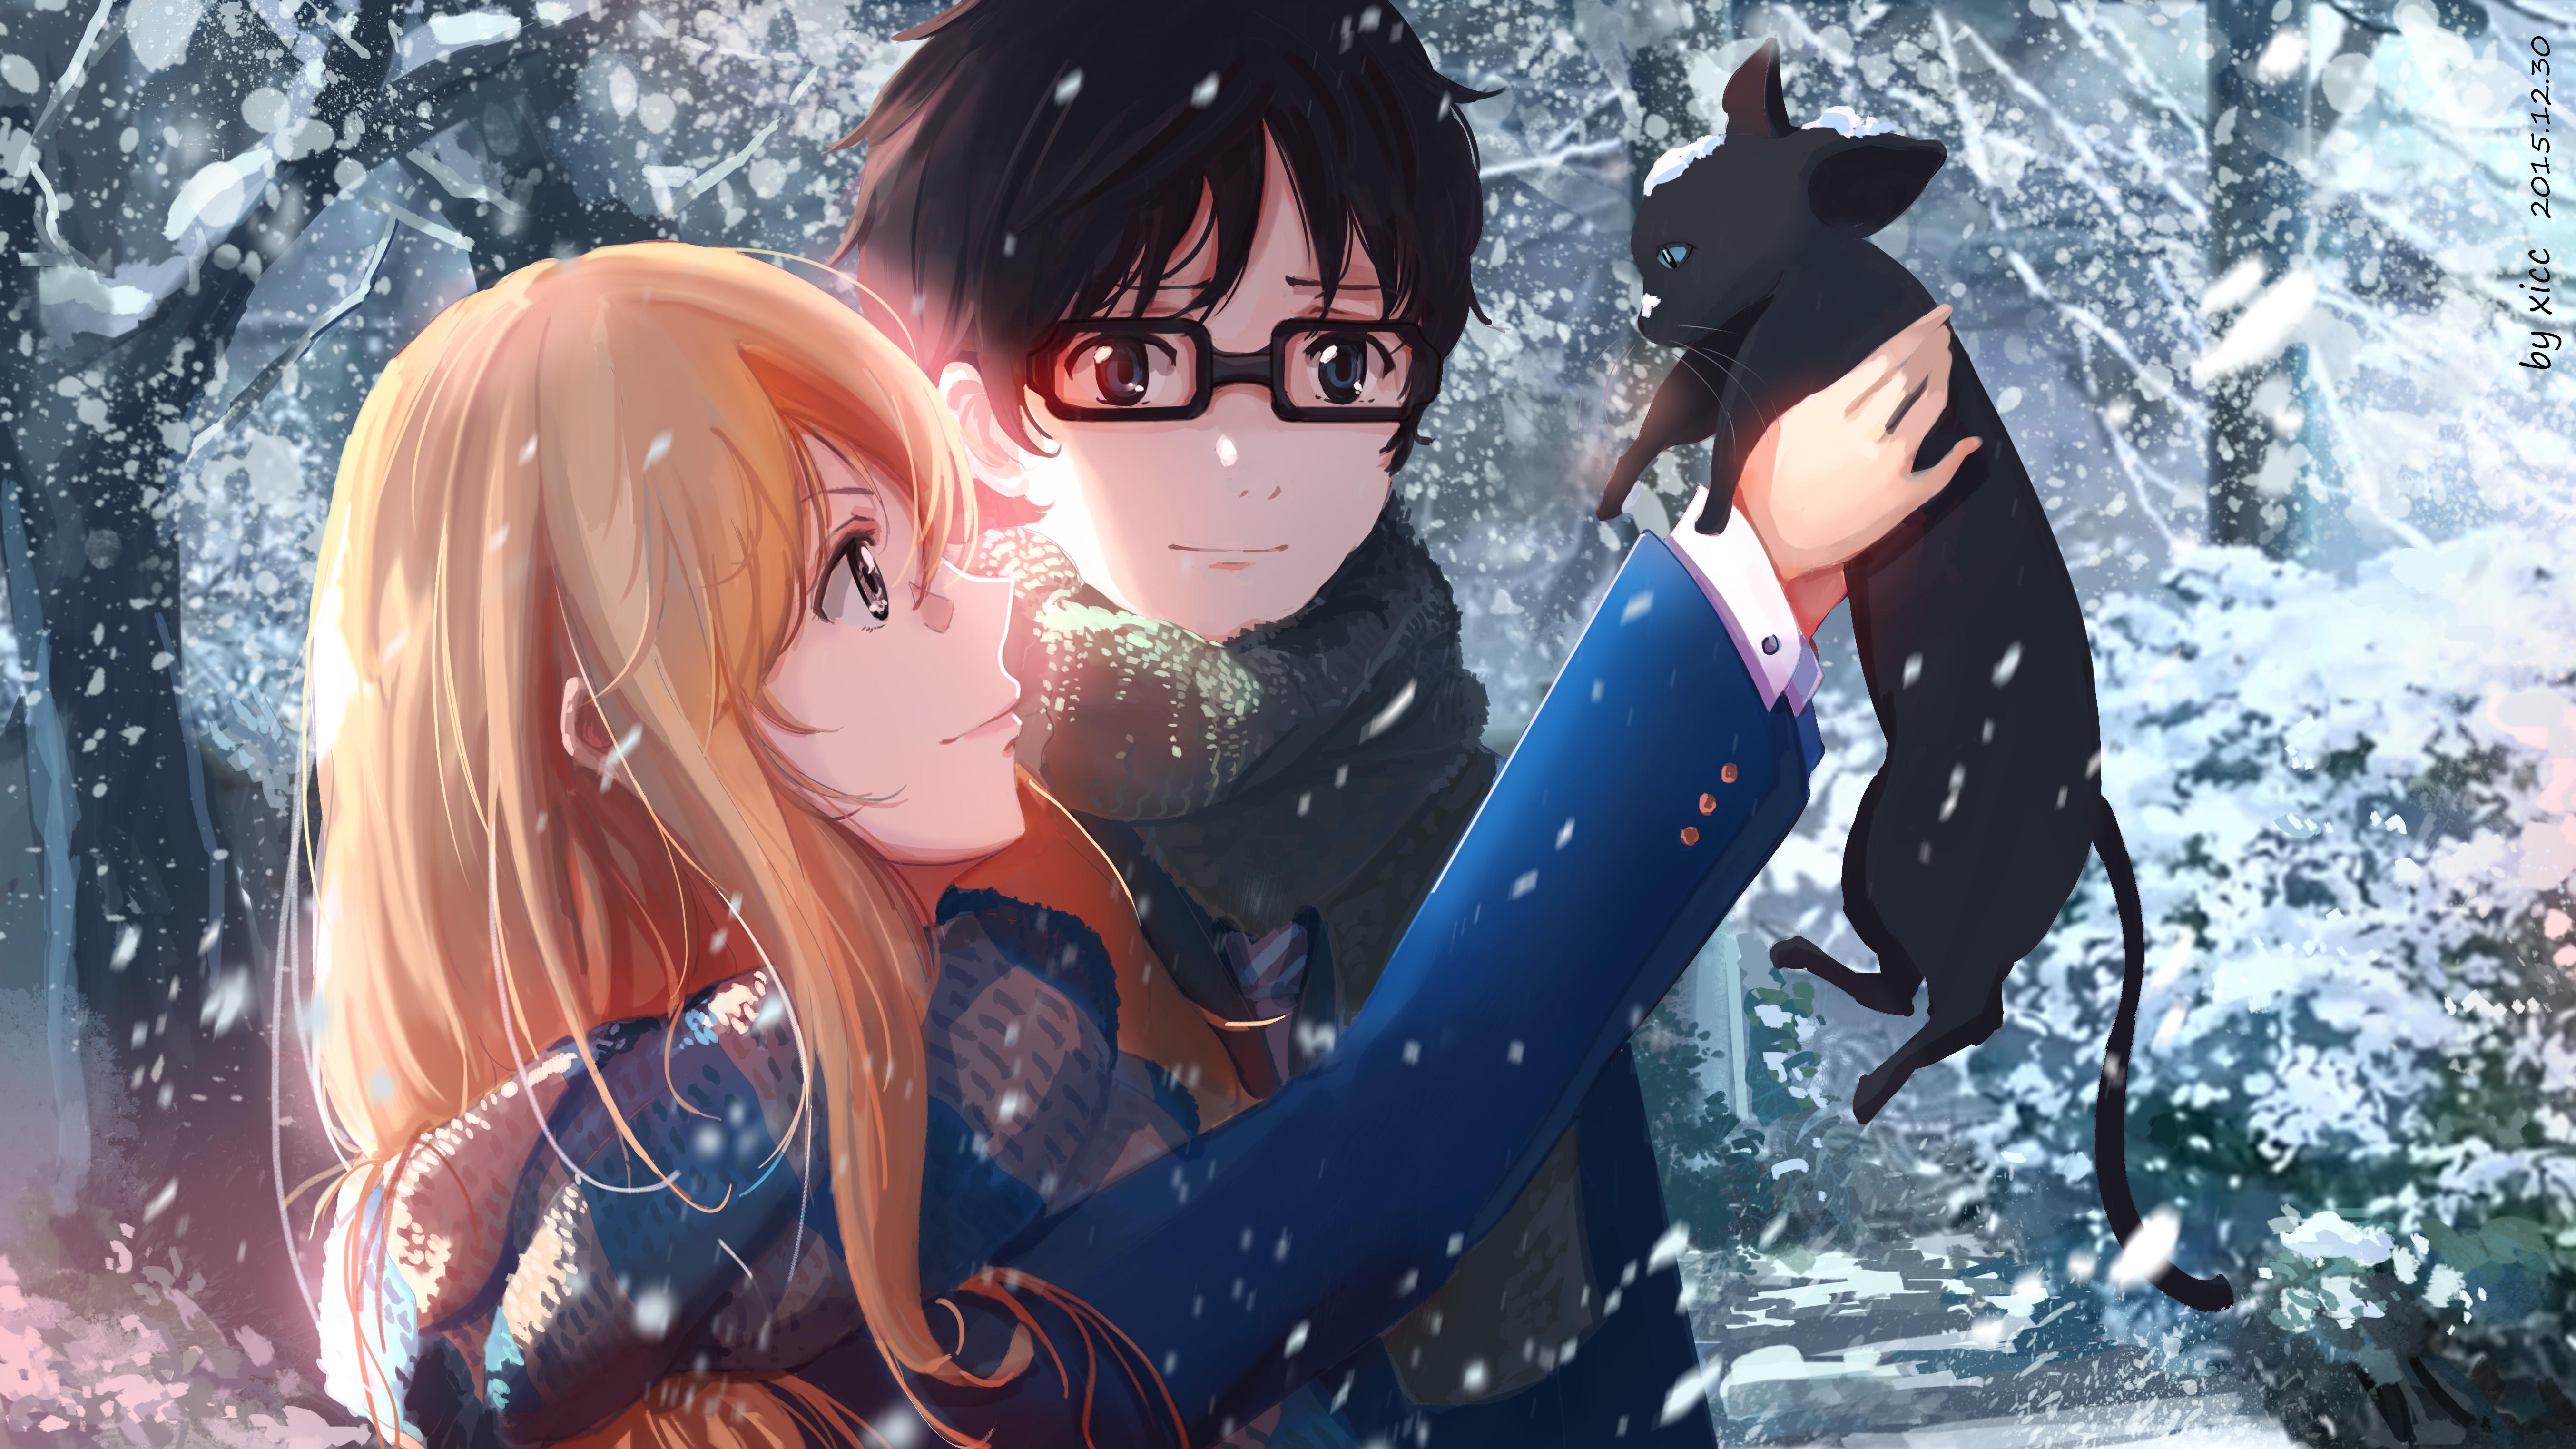 Hd Wallpaper Arima Your Lie In April